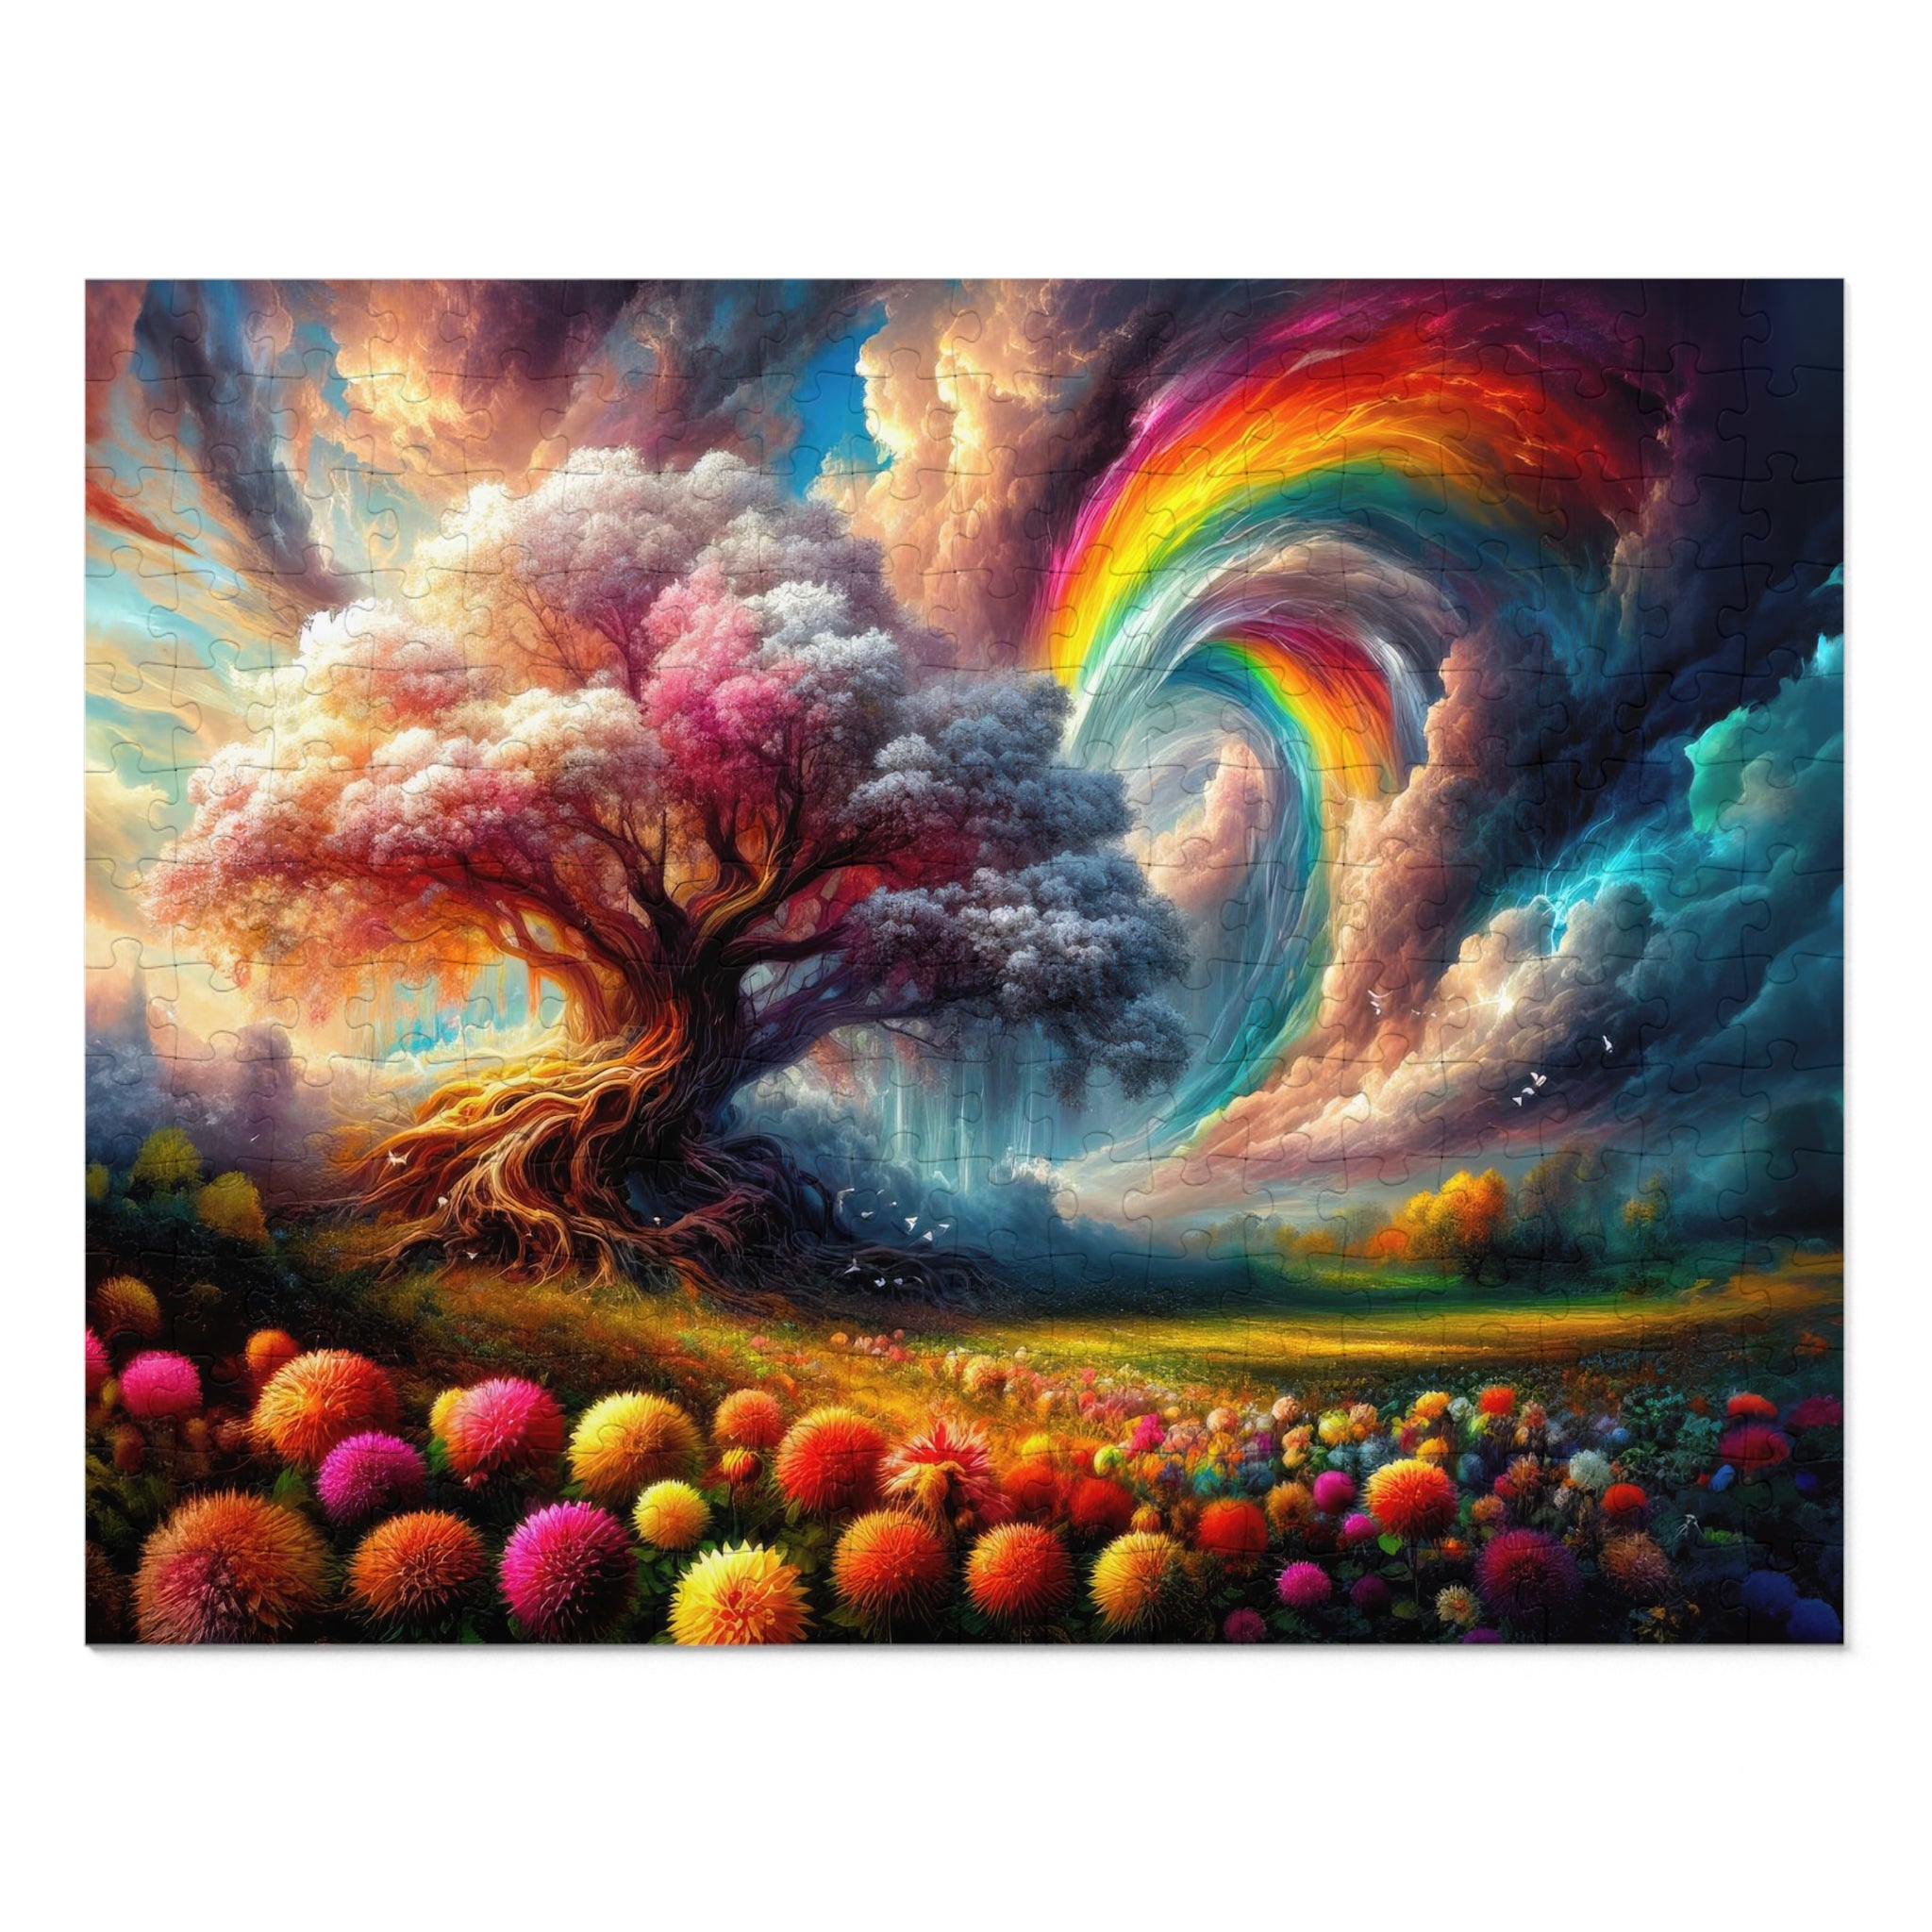 Vortex of the Enchanted Arbor Jigsaw Puzzle